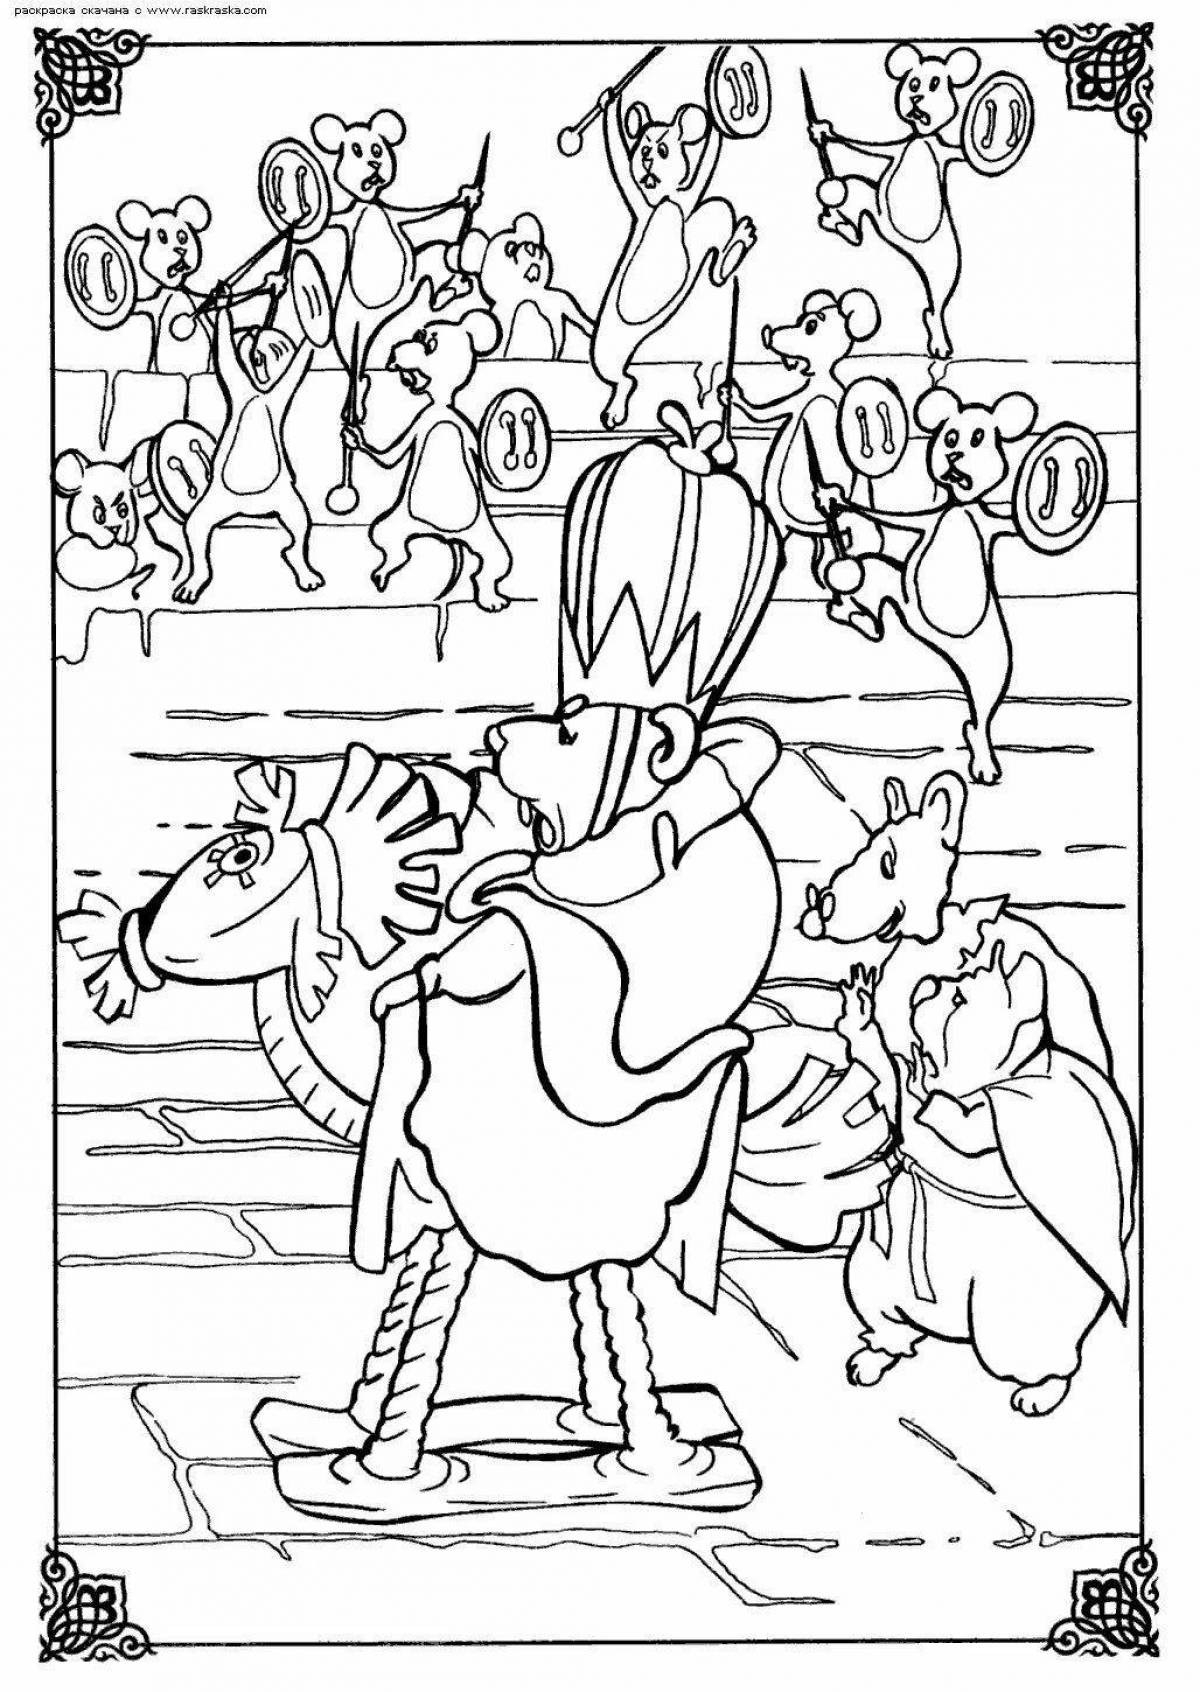 Majestic mouse king coloring page